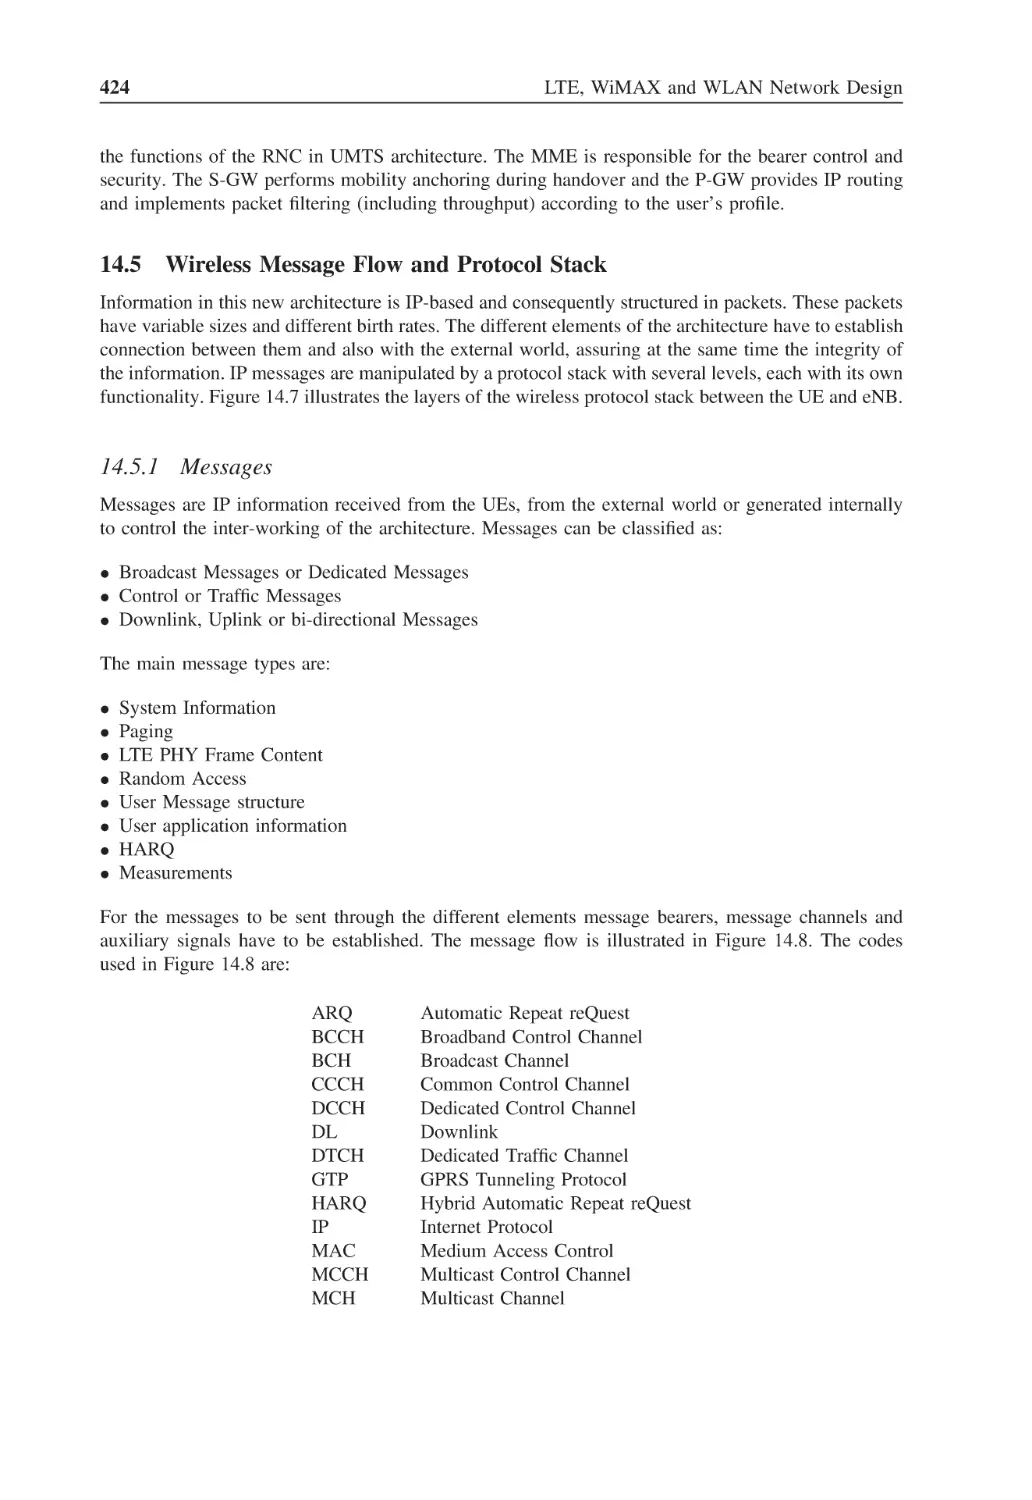 14.5 Wireless Message Flow and Protocol Stack
14.5.1 Messages